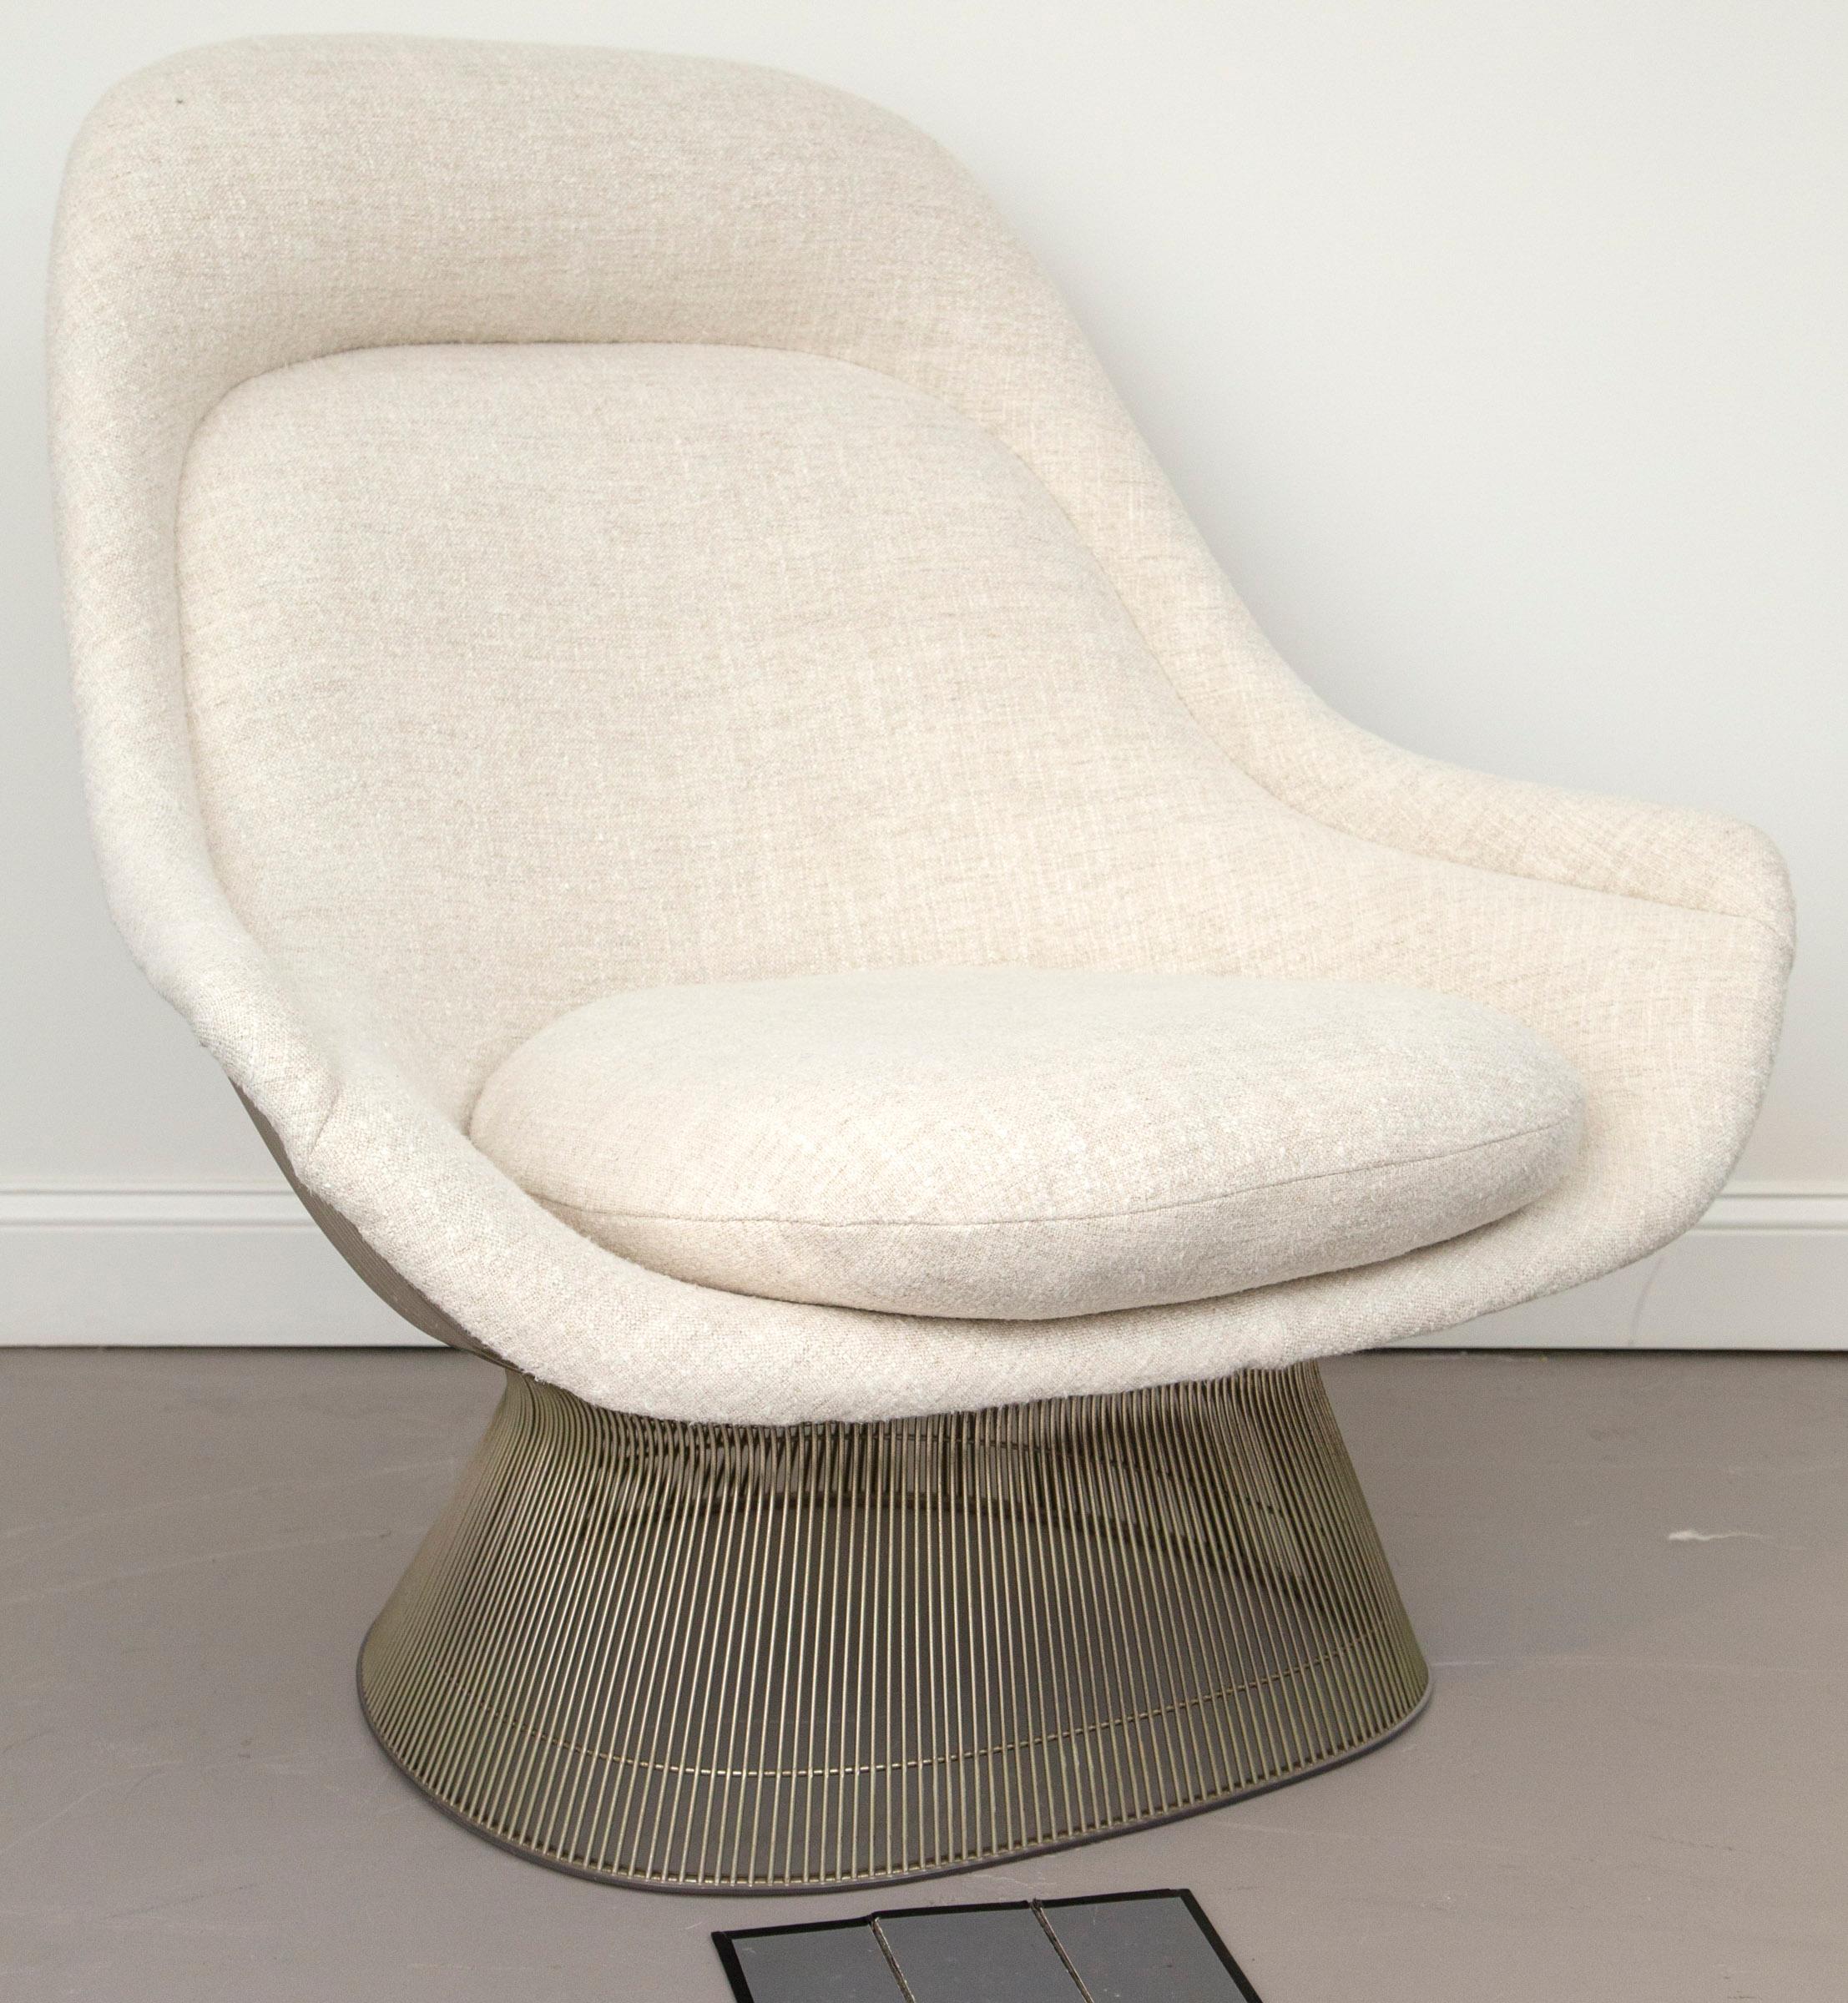 Beautiful and iconic Warren Platner for Knoll high back lounge chair in nickel finish recovered in a new Maharam wool fabric. Simple design yet incredible attention to detail make this chair attractive to look at as well as comfortable.

Two